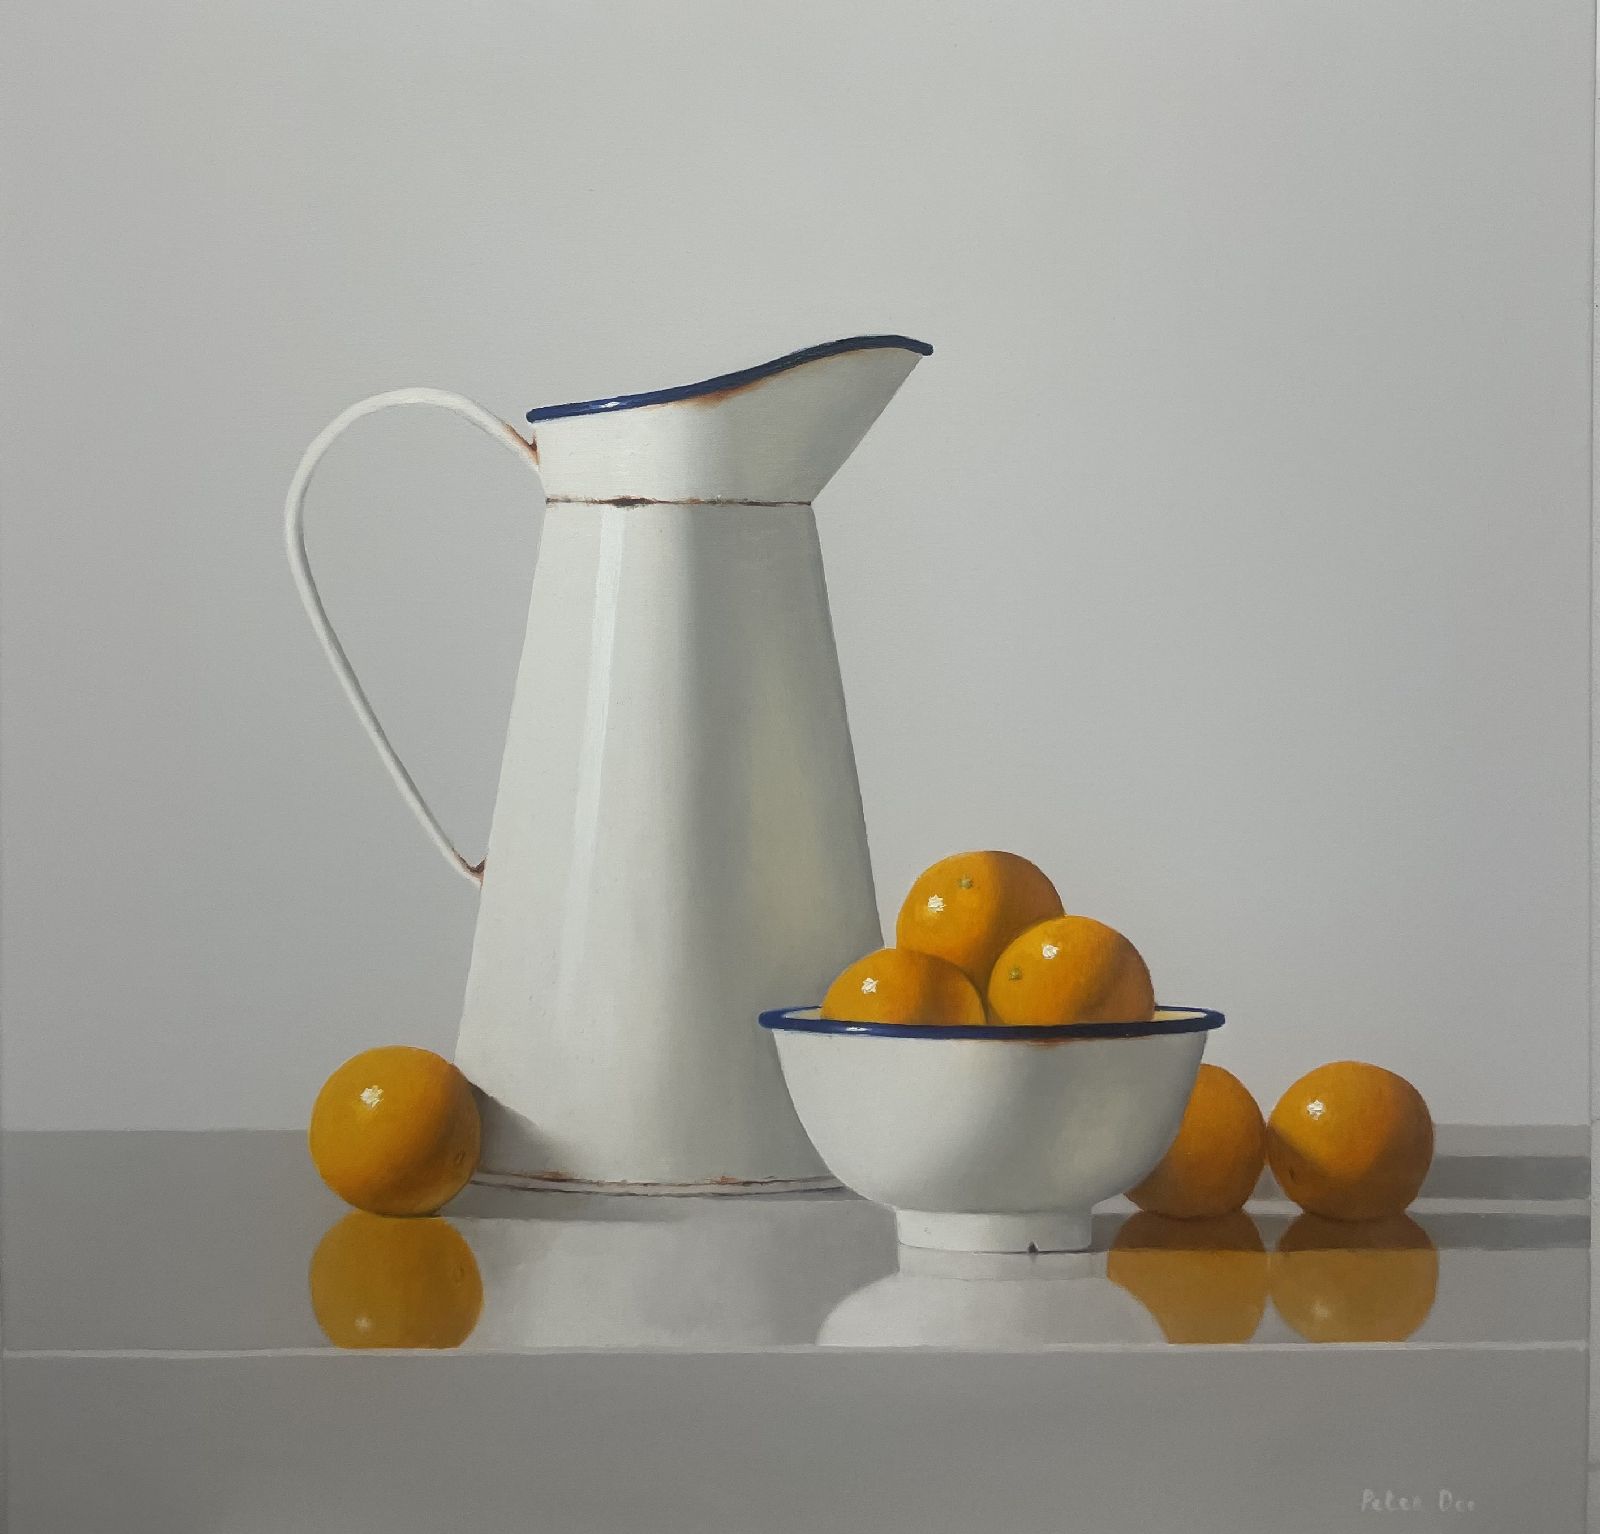 White Vintage Enamelware Pitcher and Bowl with Oranges by Peter Dee